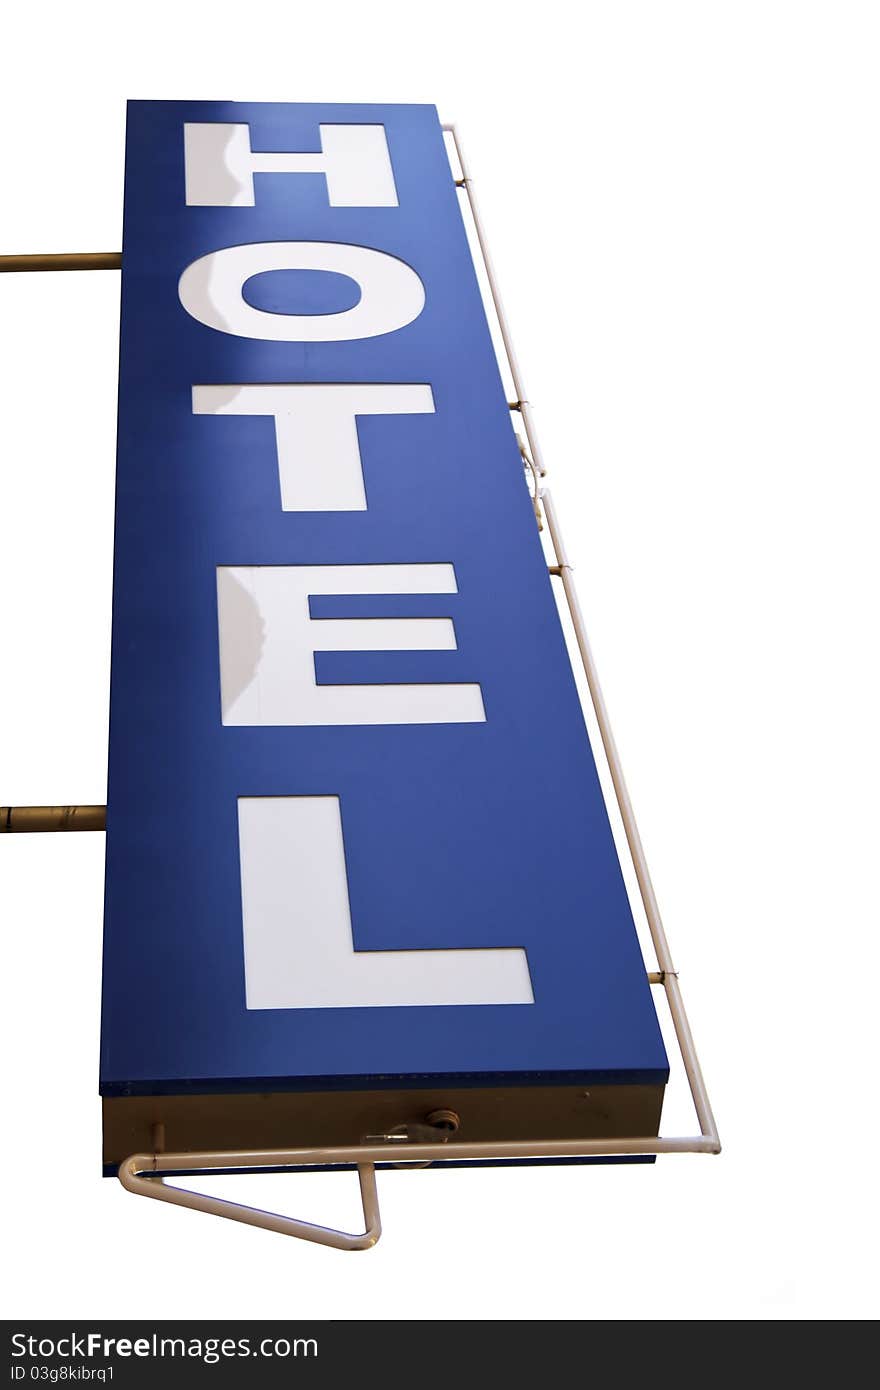 A blue hotel sign in a white background